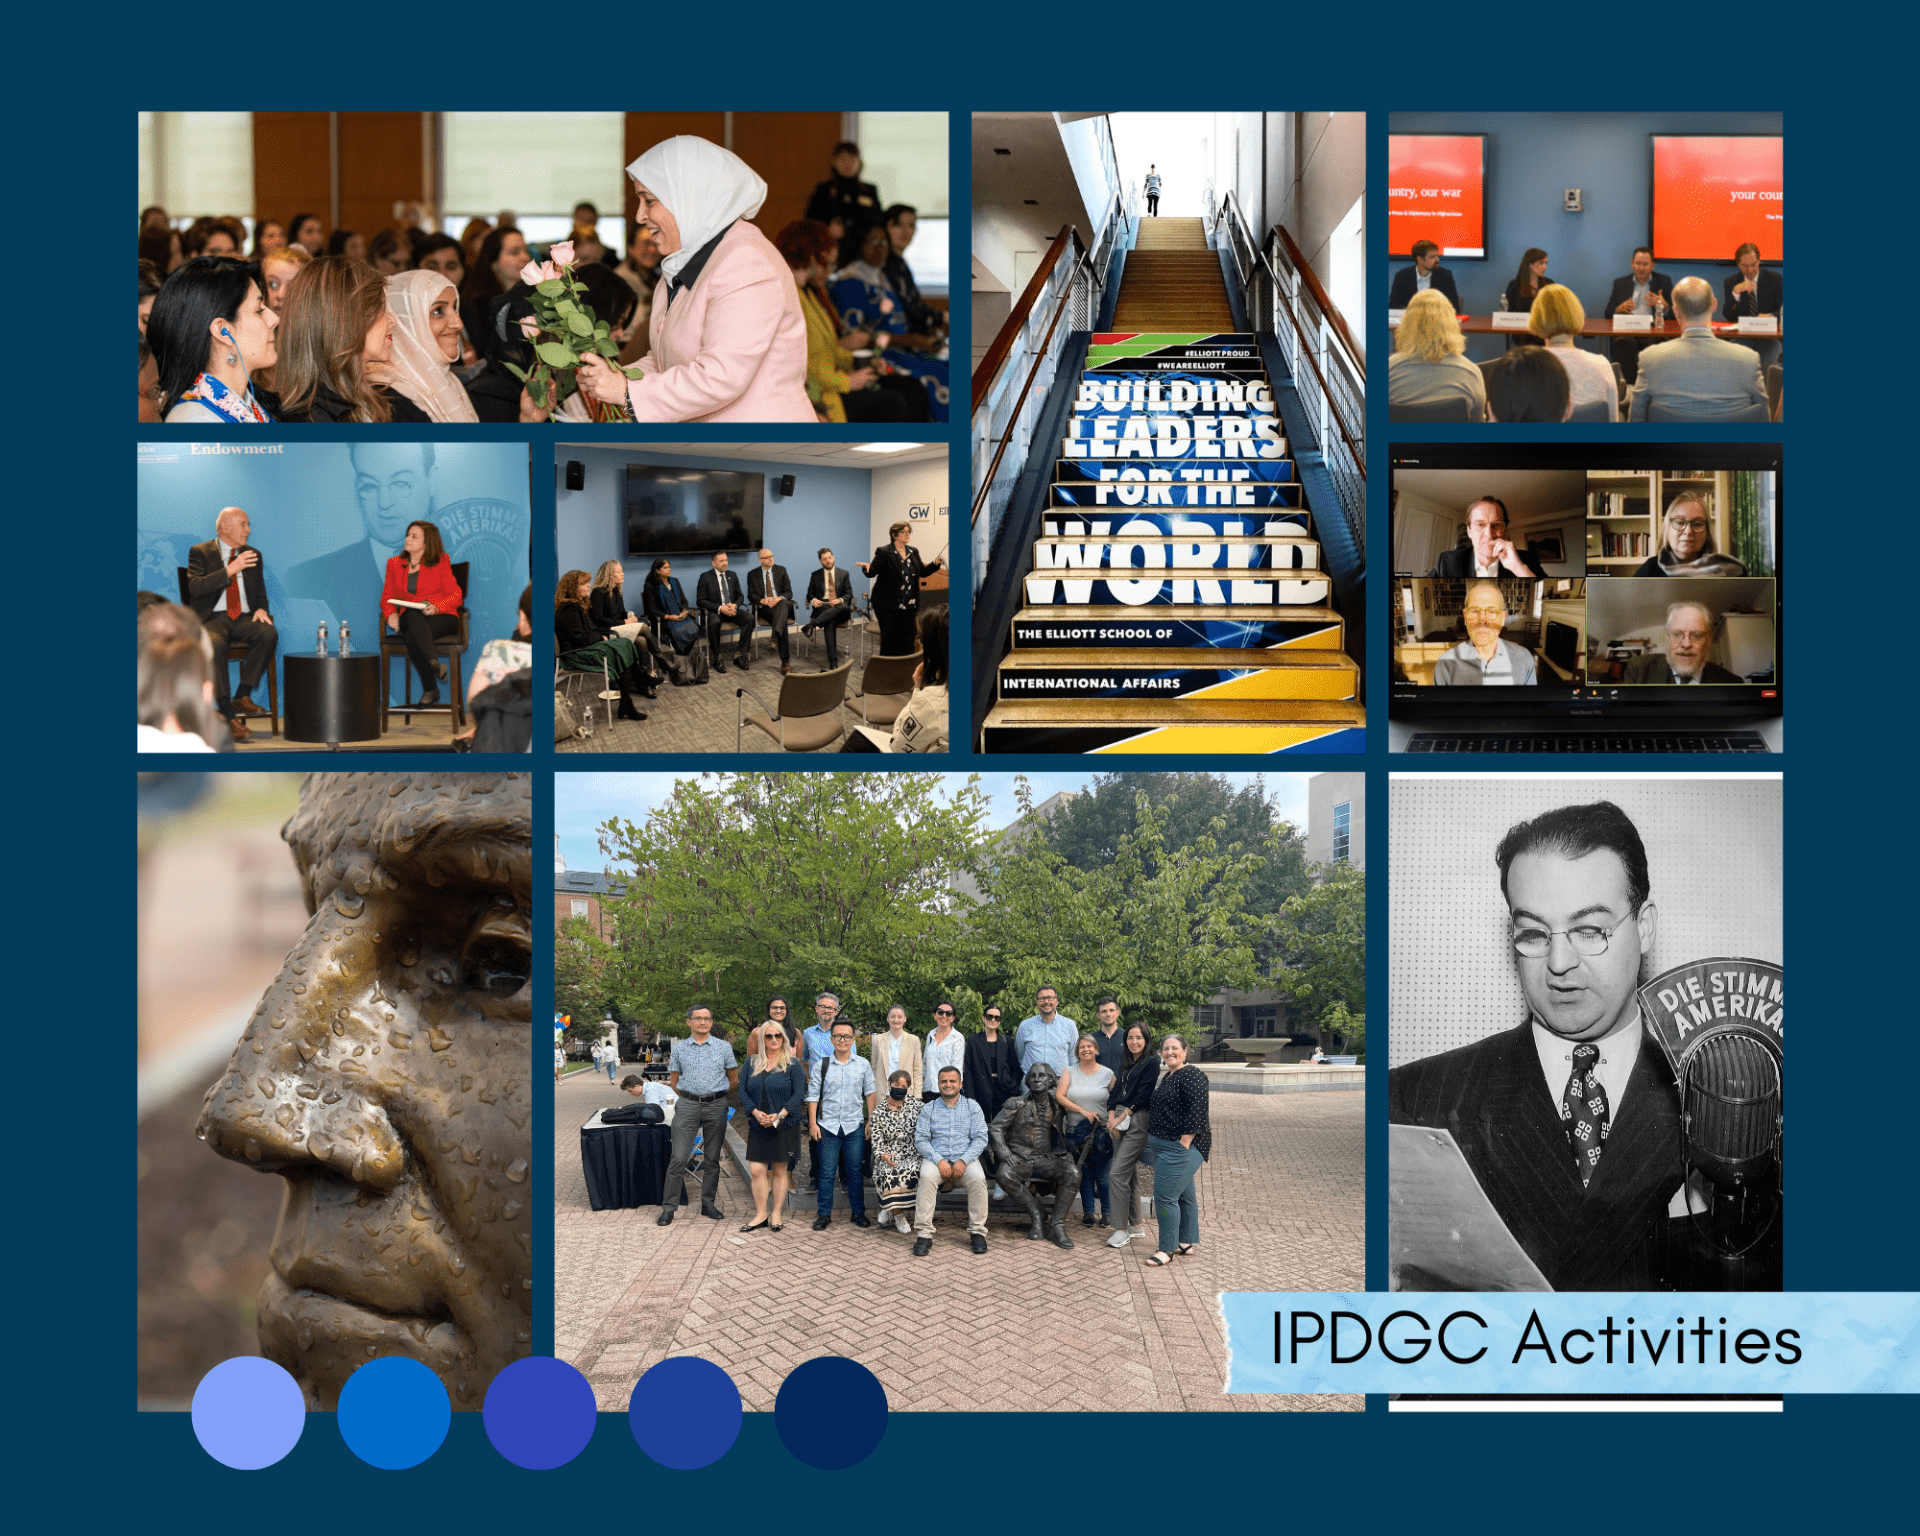 Photo collage of events hosted by IPDGC, views of the Elliott School, and Walter Roberts. Text reads "IPDGC activities" in the bottom right corner